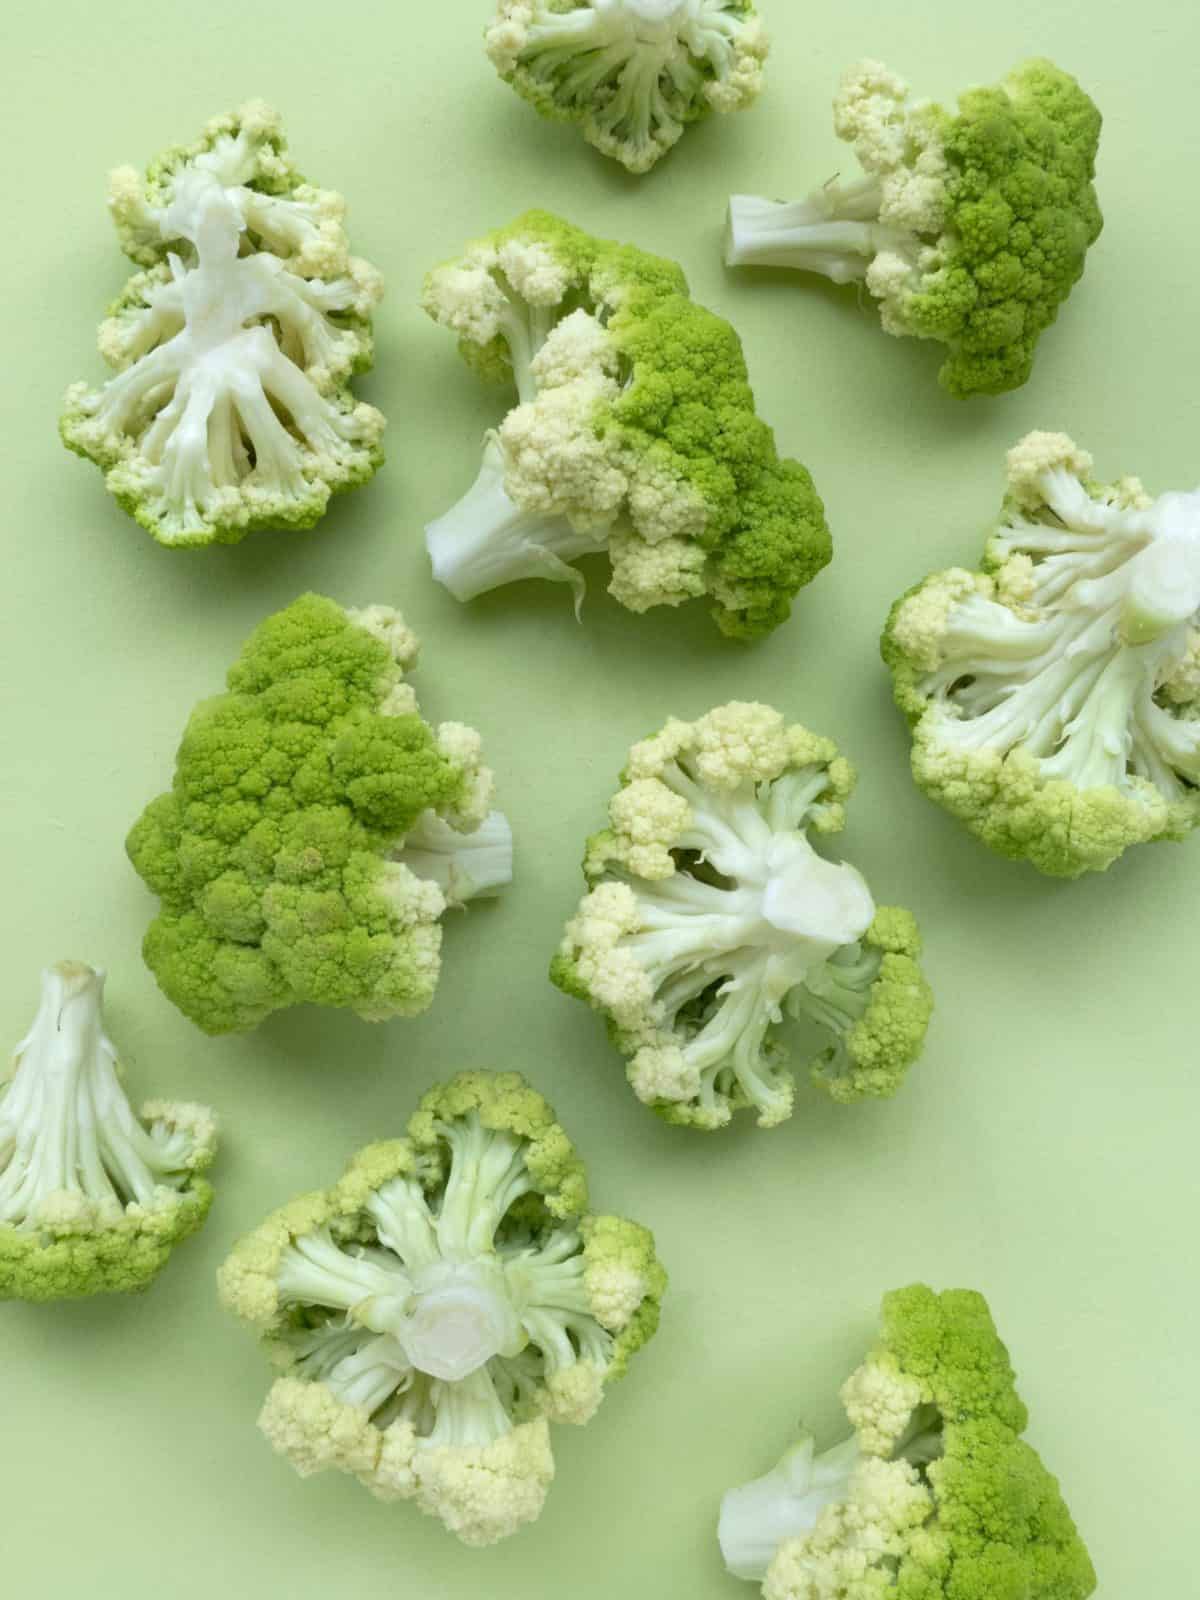 A variety of broccoli florets which should be avoided with hypothyroidism.